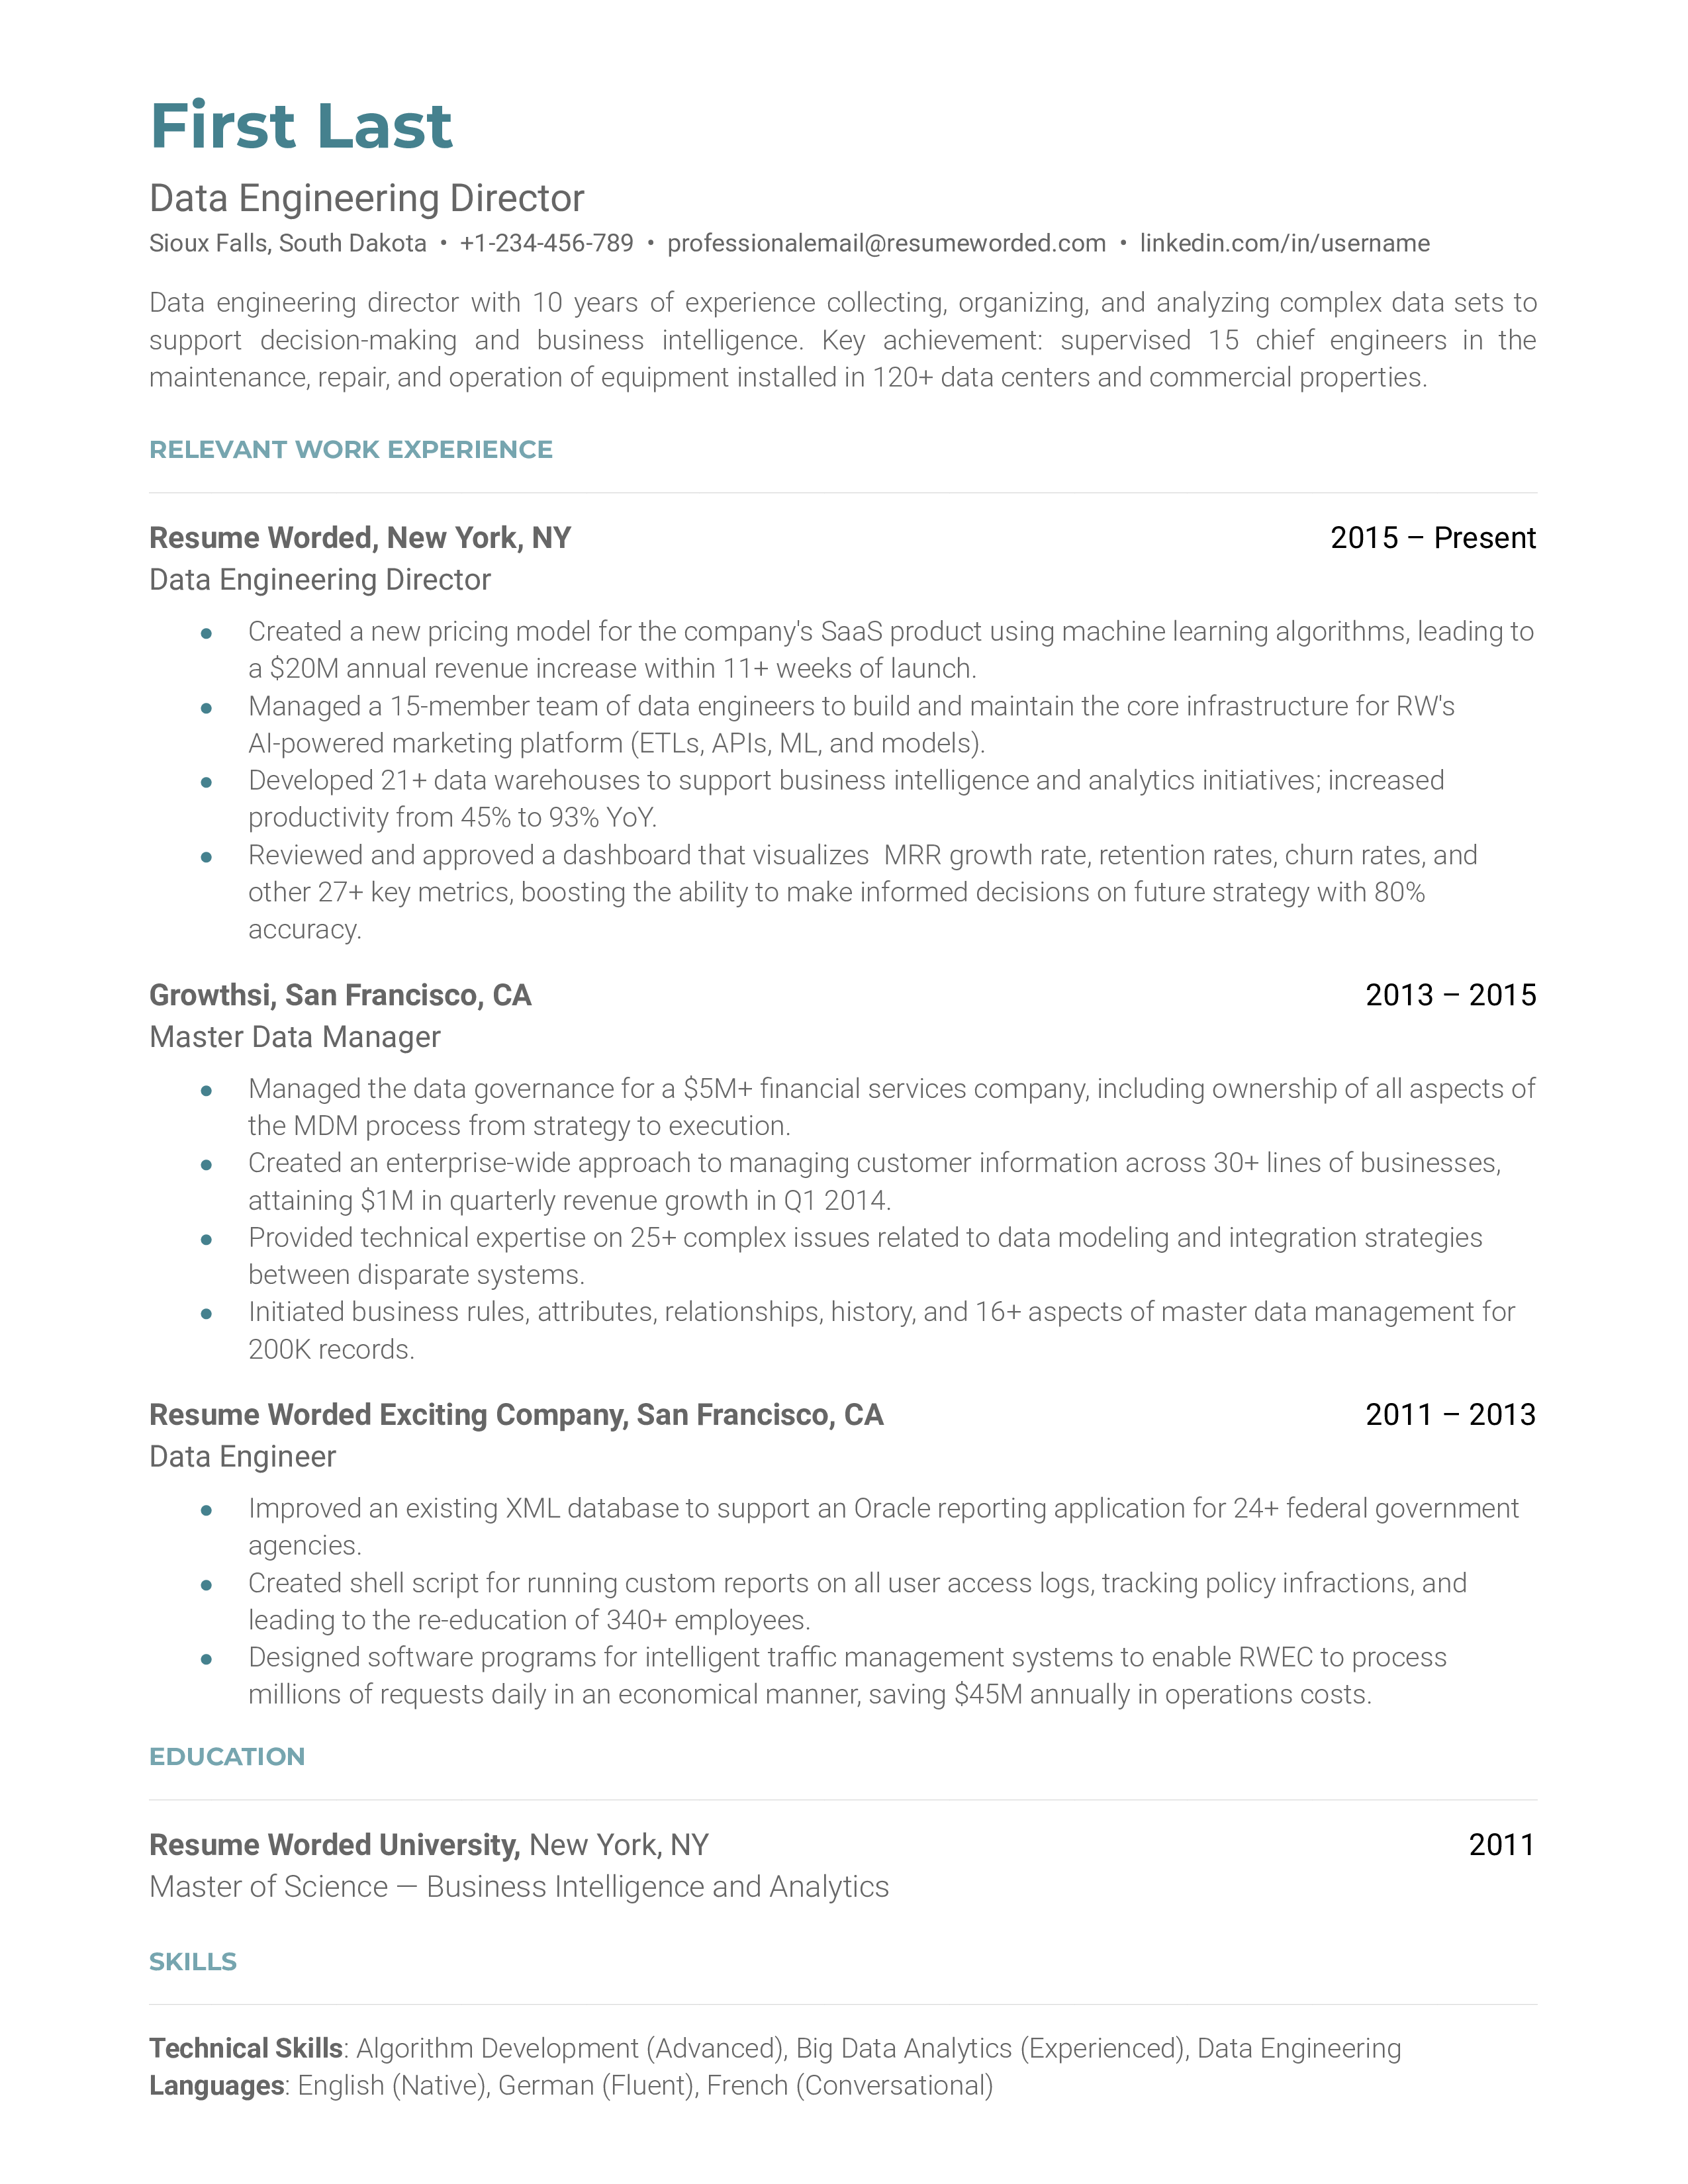 A data engineering director resume template focused on the data science field. 